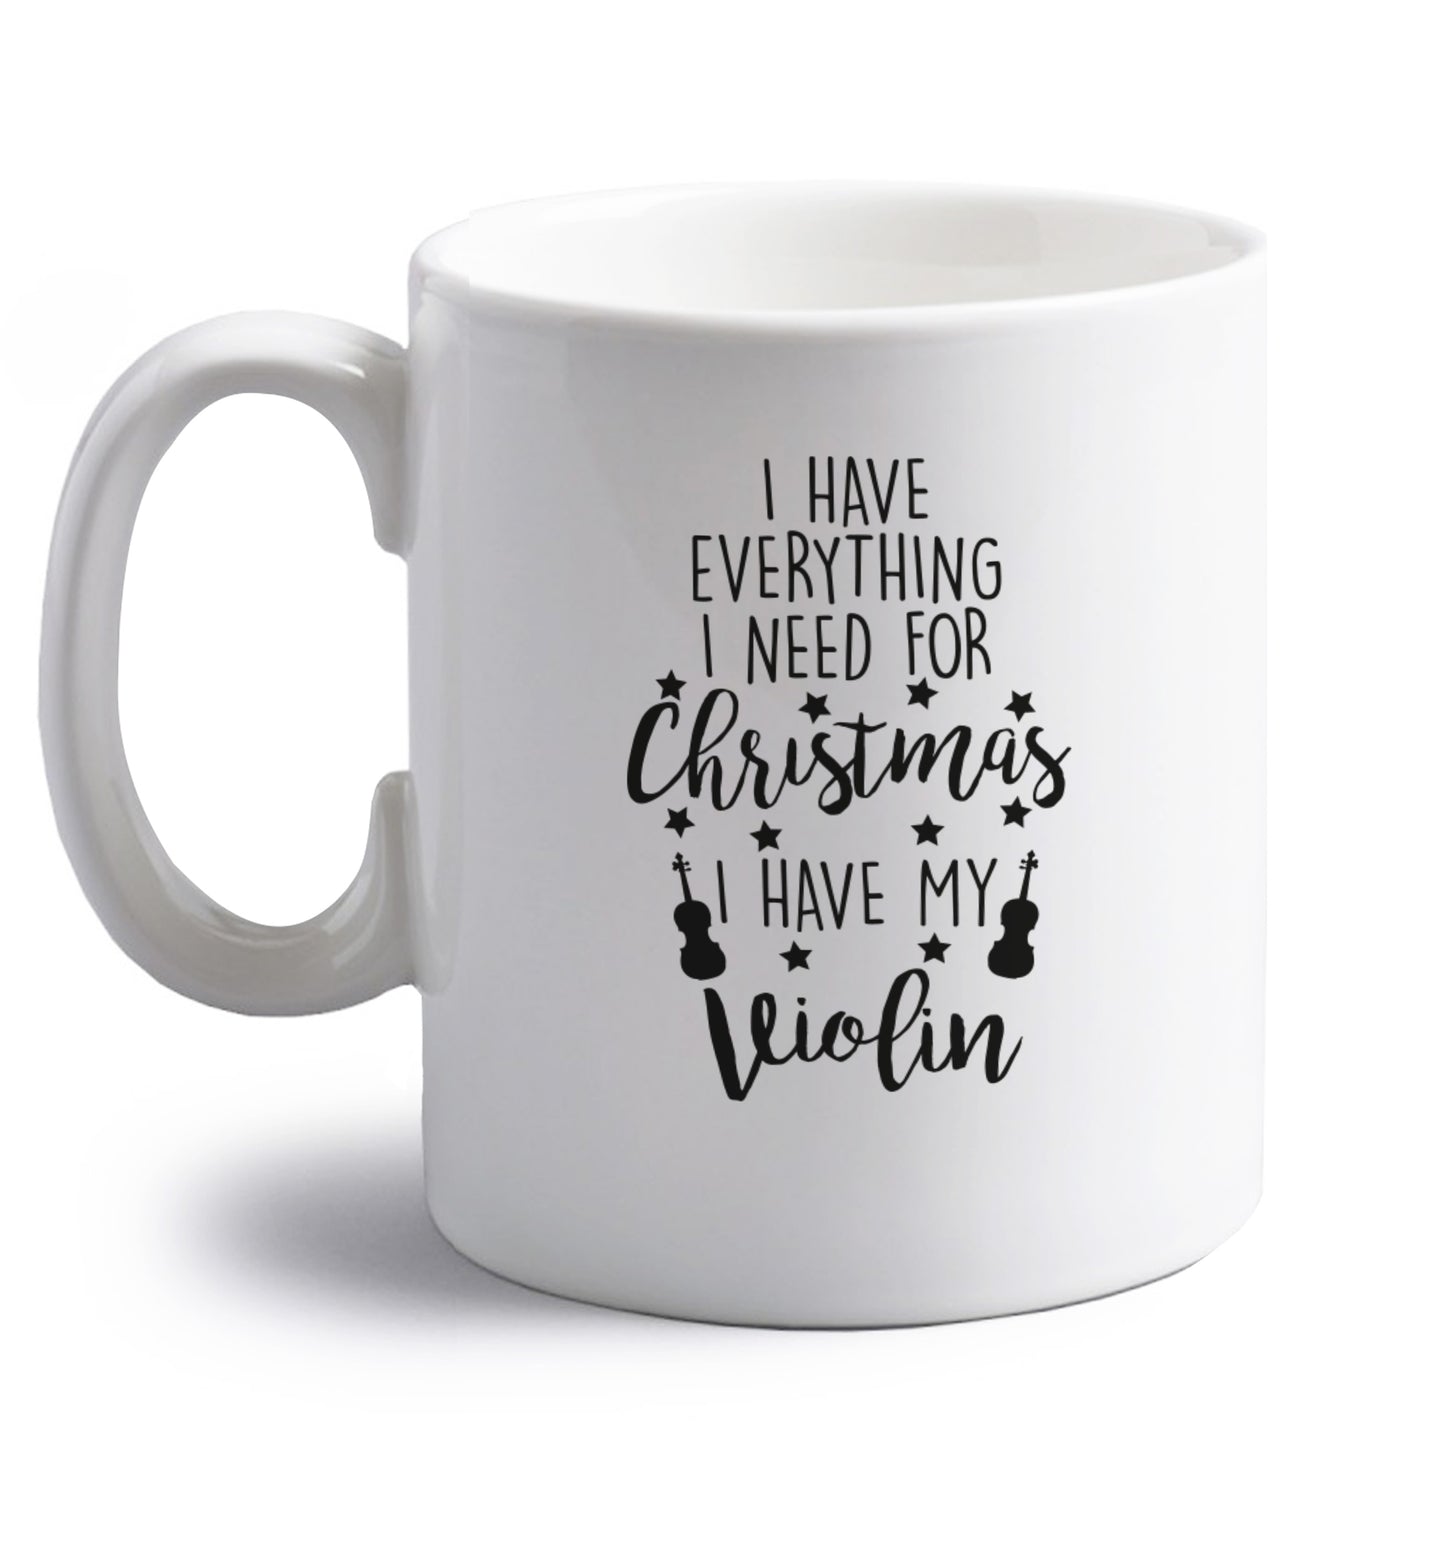 I have everything I need for Christmas I have my violin right handed white ceramic mug 